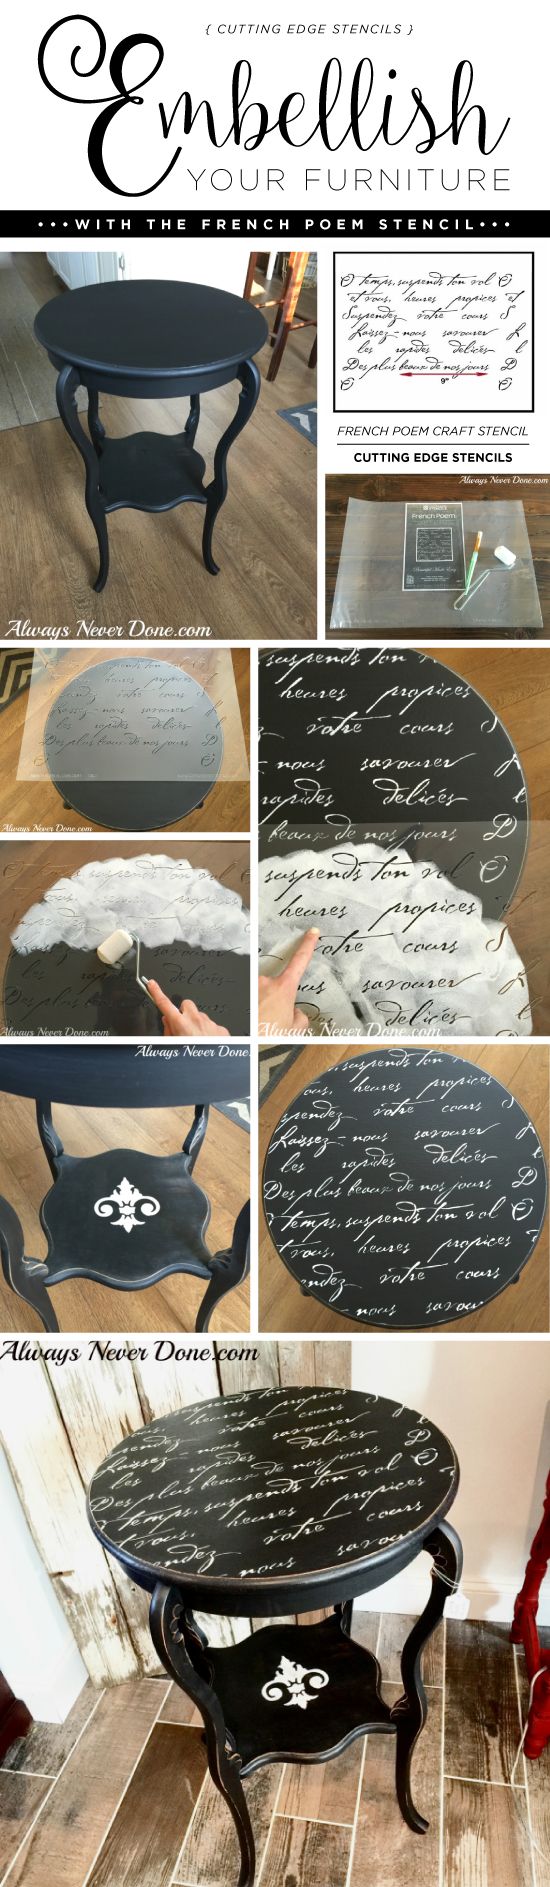 Embellish Your Furniture With the French Poem Stencil